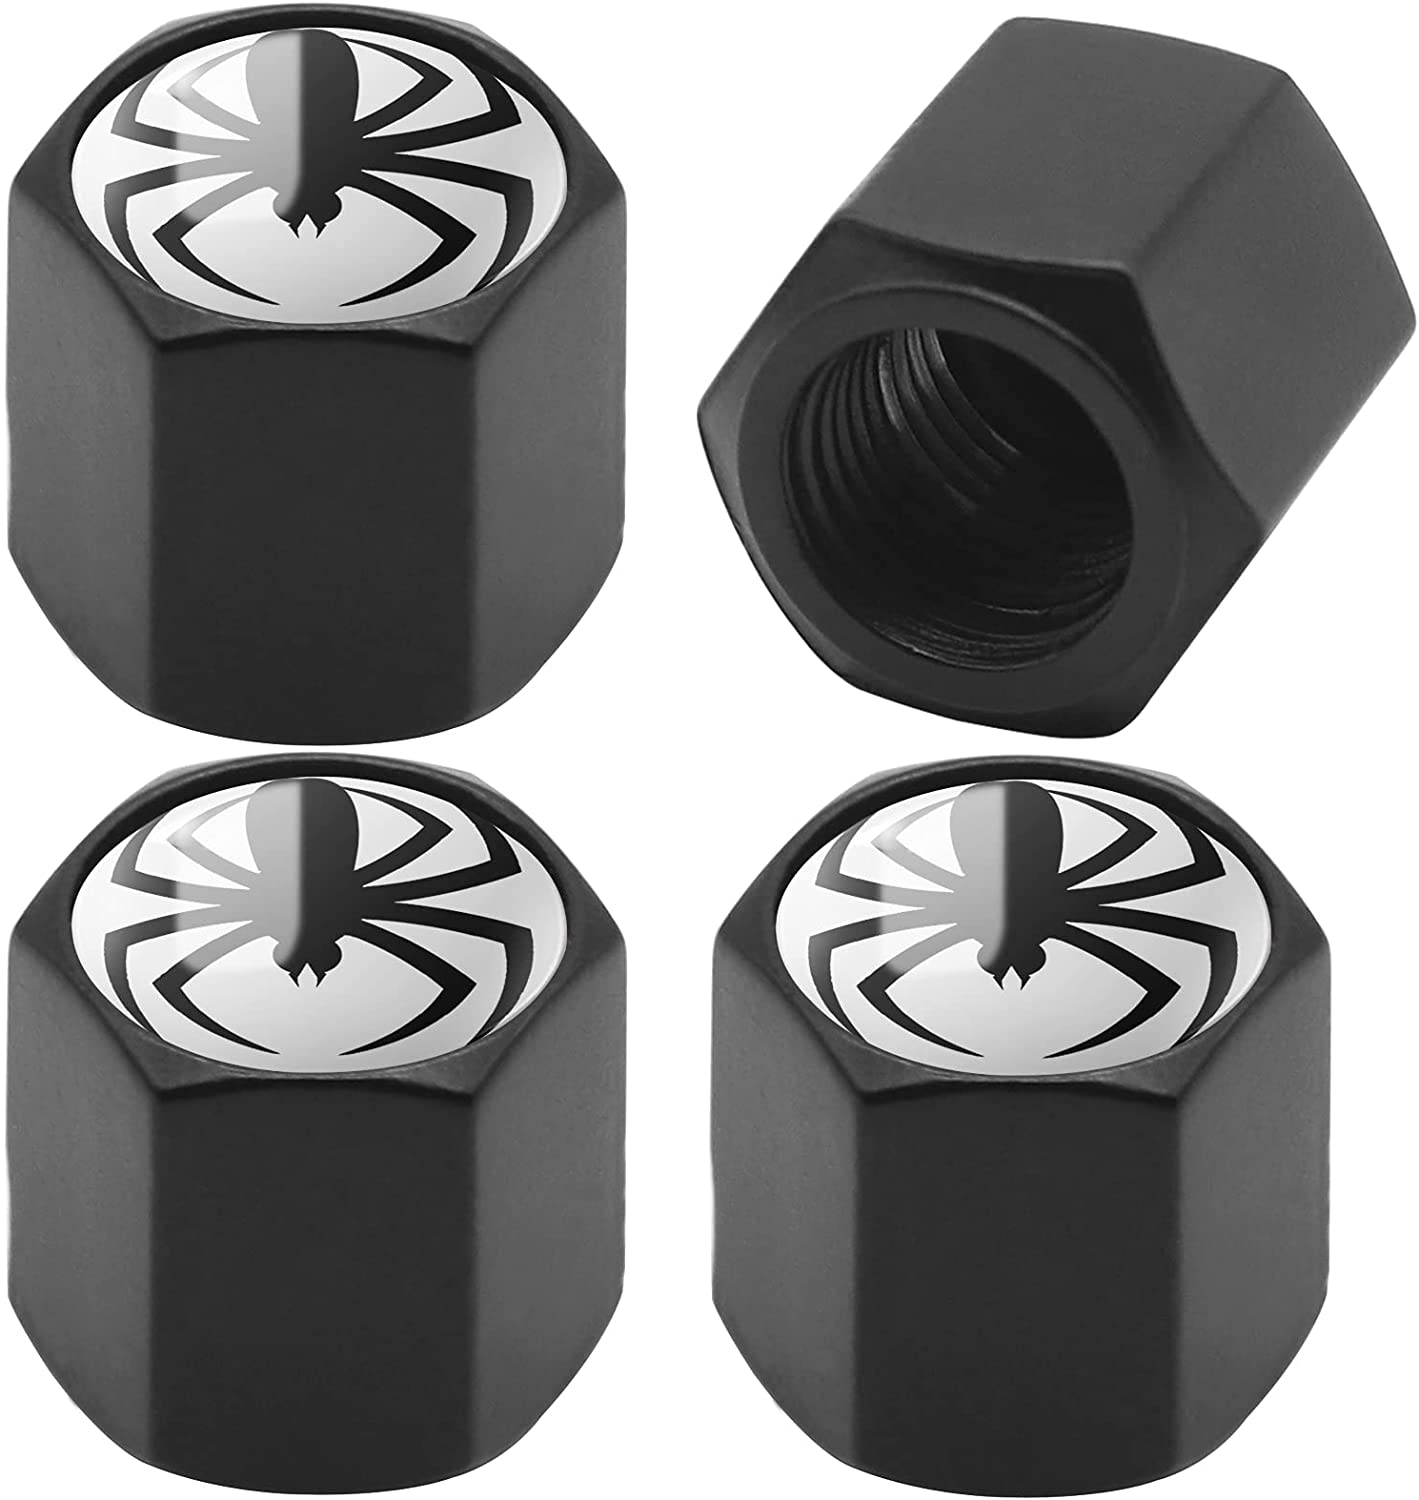 Tire Stem Valve Caps with SS, Universal Valve Stem Cap, Tire Stem Covers for Cars, SUV, Bike，Bicycle, Trucks, Motorcycles, 4PCS